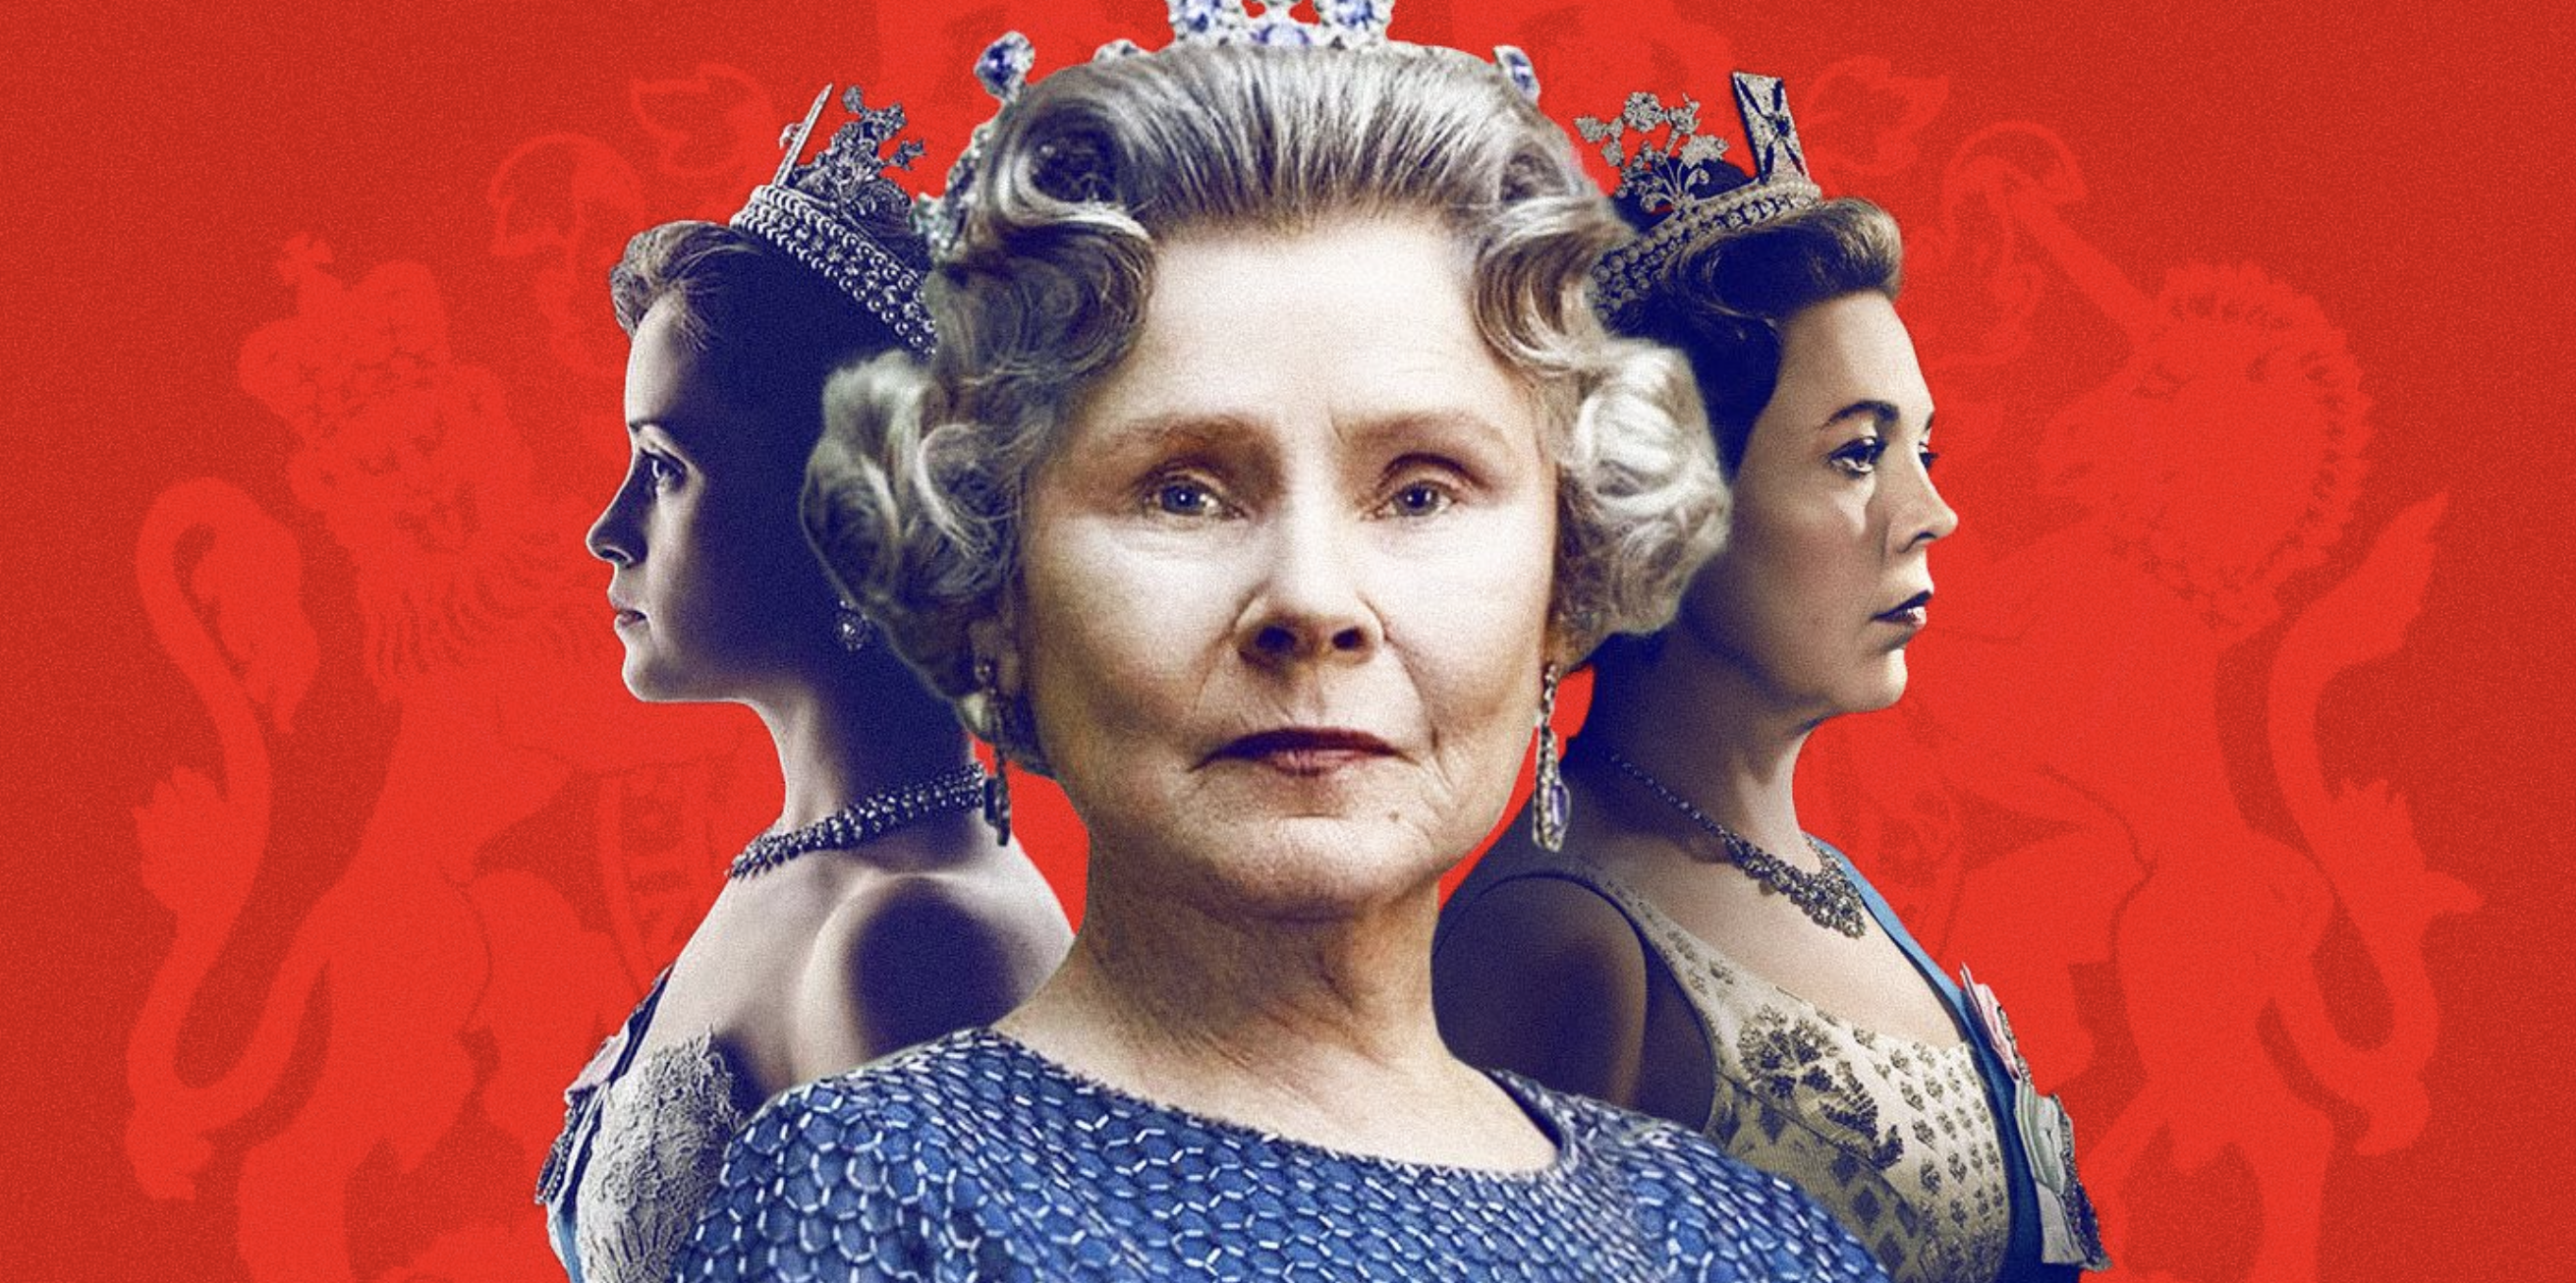 Imelda Staunton Opens Up About the ‘Tough’ Moments Filming ‘The Crown’ Season 6 Post Queen Elizabeth II’s Demise.